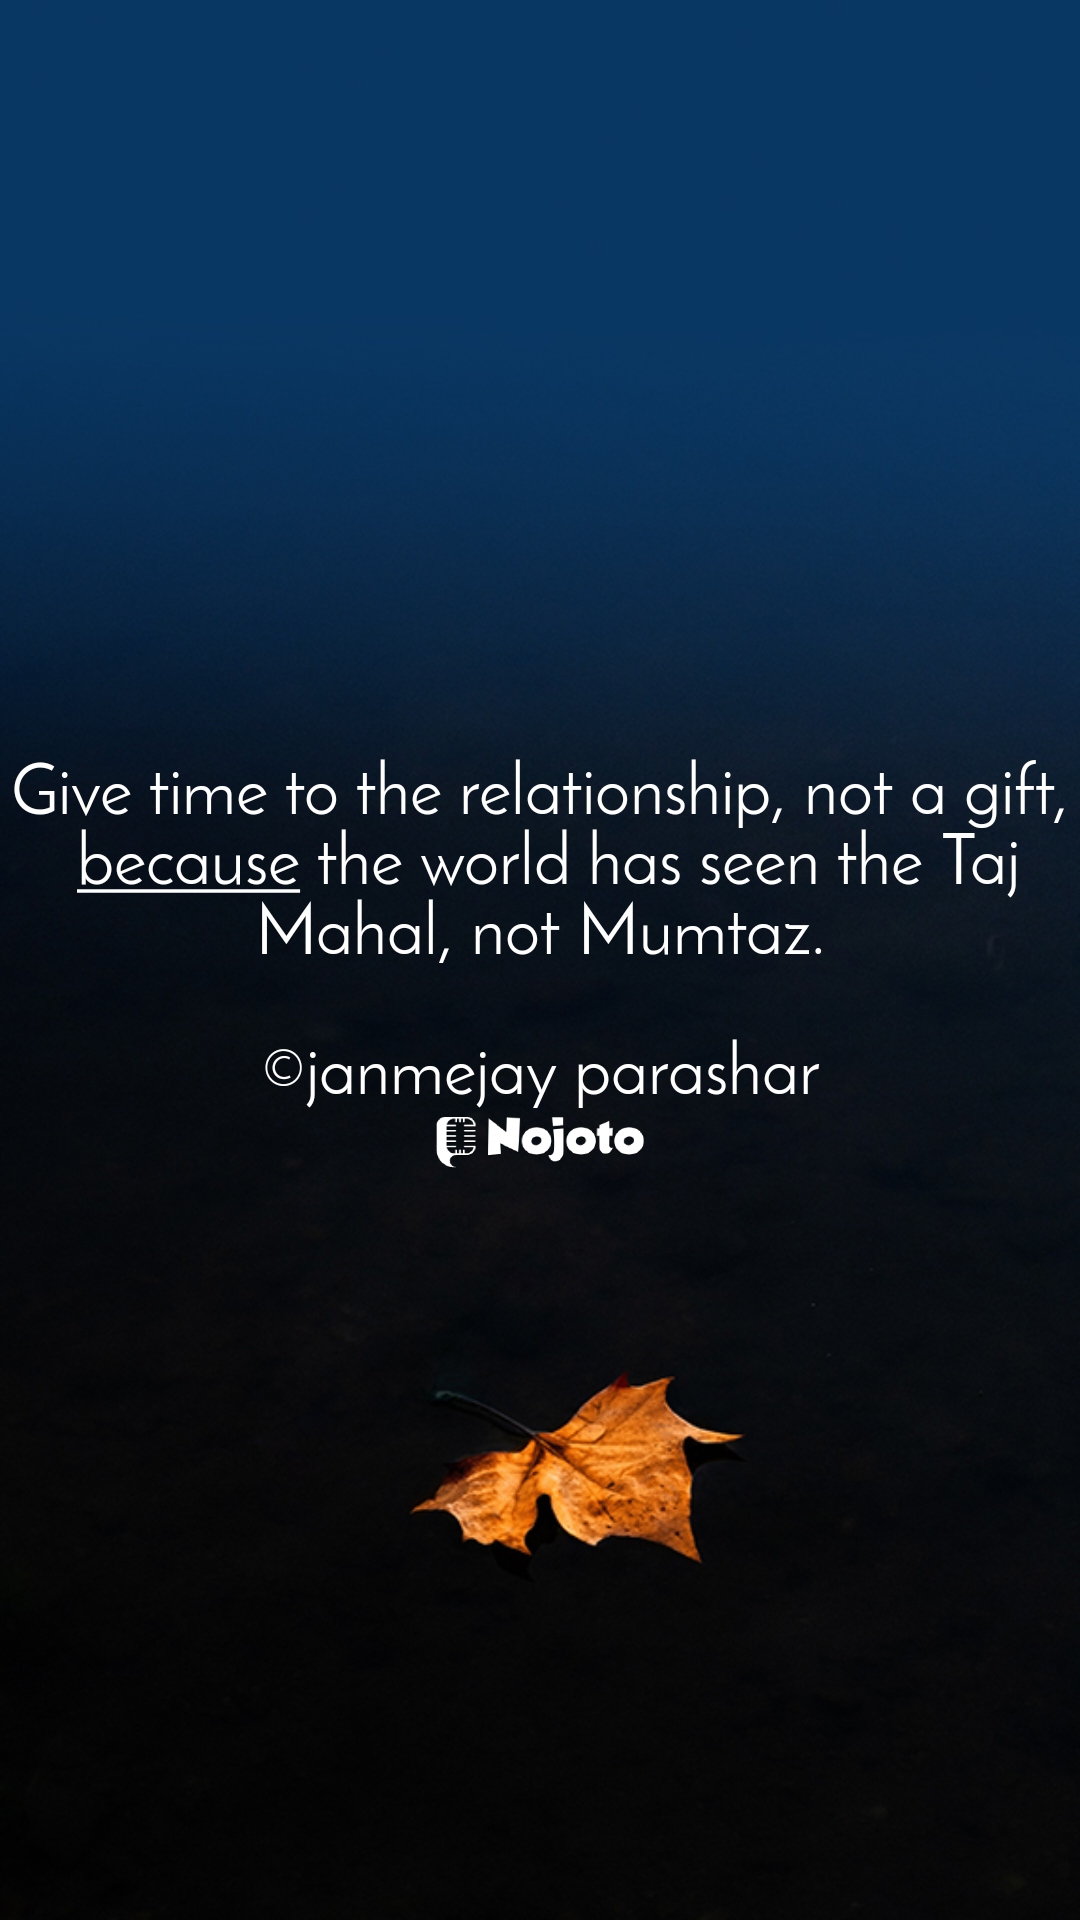 Give time to the relationship, not a gift, because the world has seen the Taj Mahal, not Mumtaz.